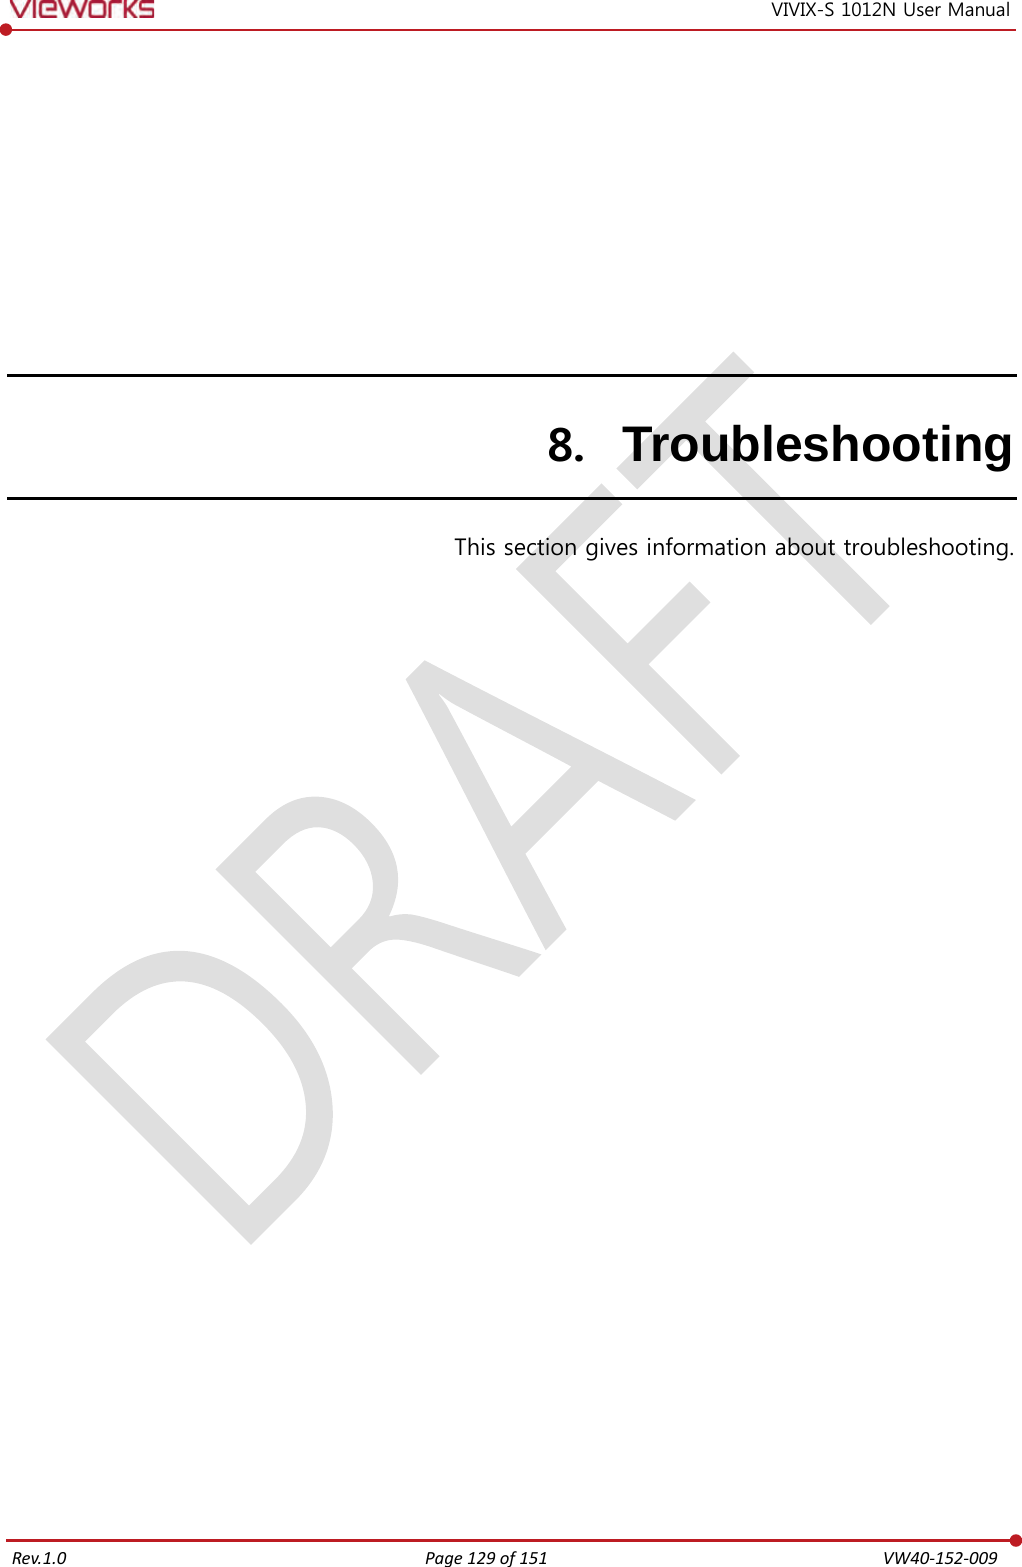   Rev.1.0 Page 129 of 151  VW40-152-009 VIVIX-S 1012N User Manual 8. Troubleshooting  This section gives information about troubleshooting.   